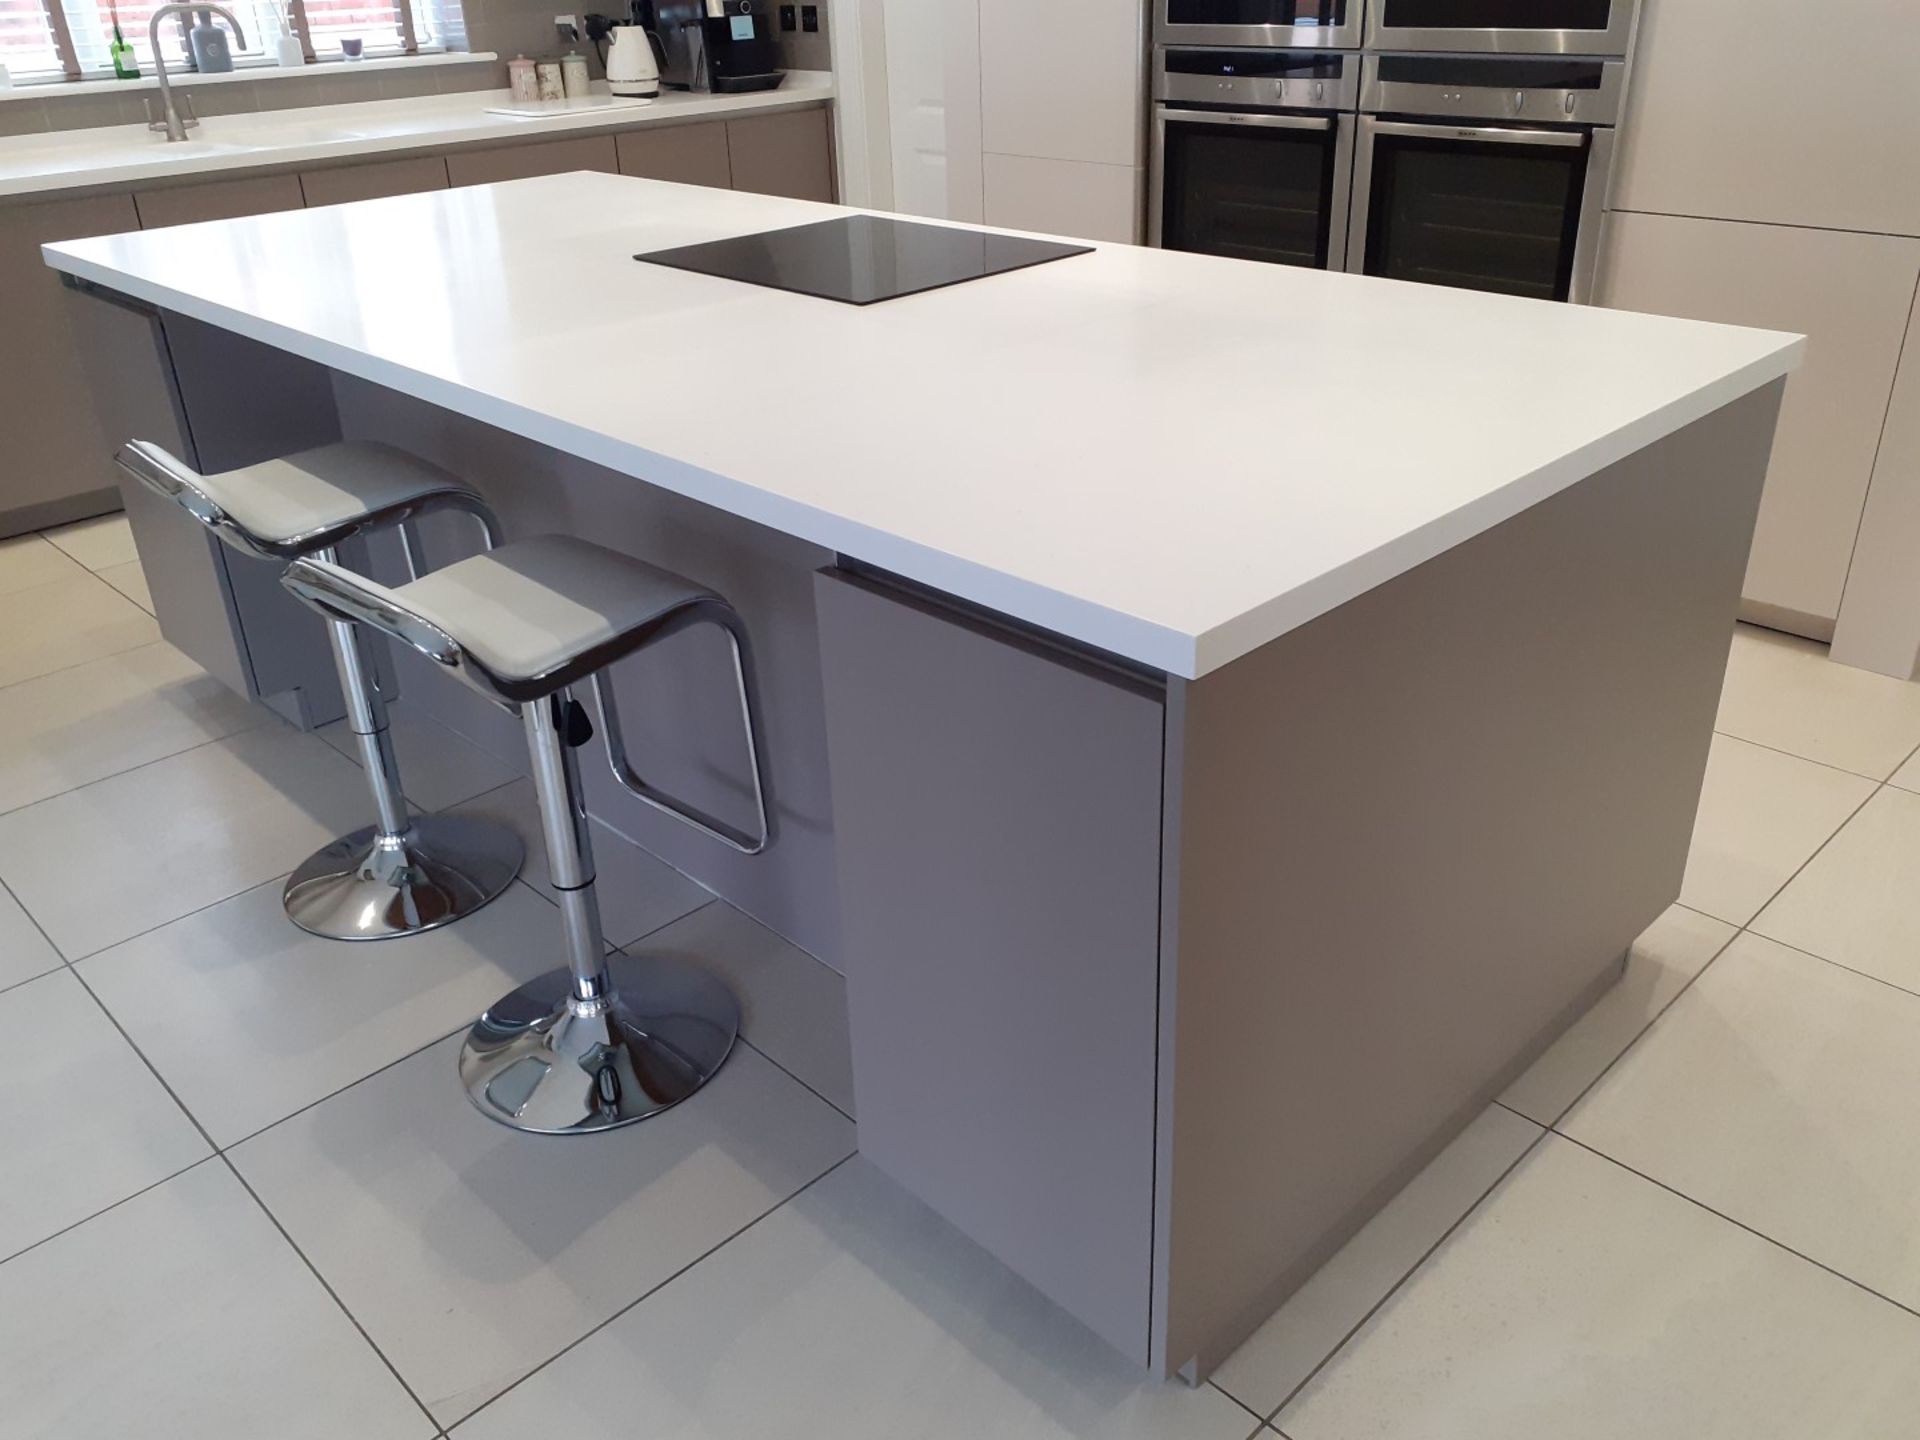 1 x SieMatic Handleless Fitted Kitchen With Intergrated NEFF Appliances, Corian Worktops And Island - Image 2 of 92